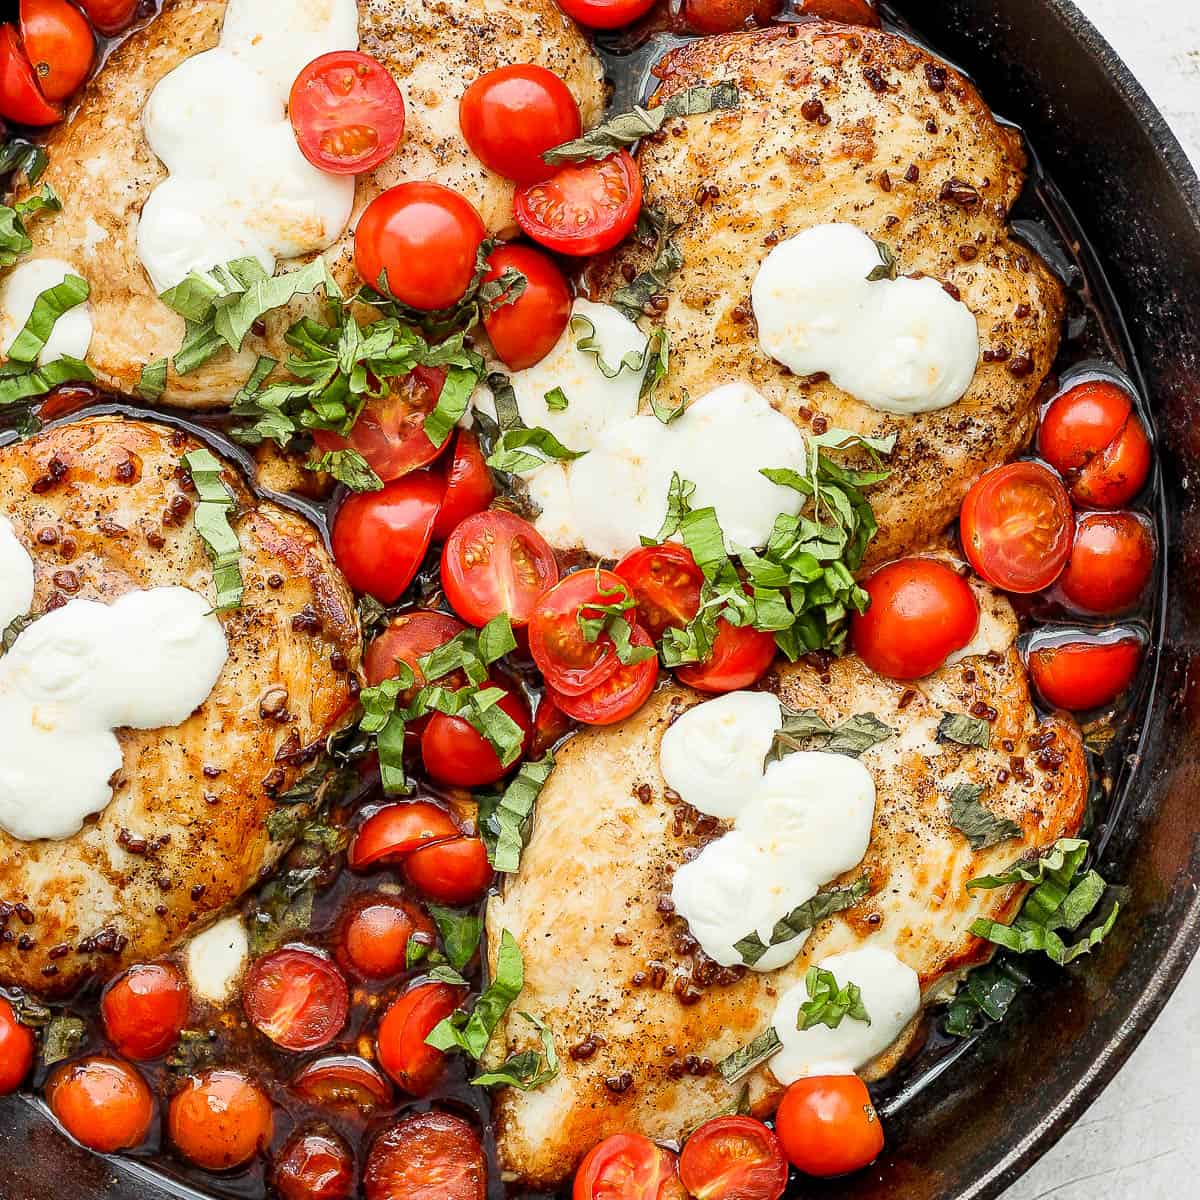 Cast iron skillet filled with balsamic chicken.